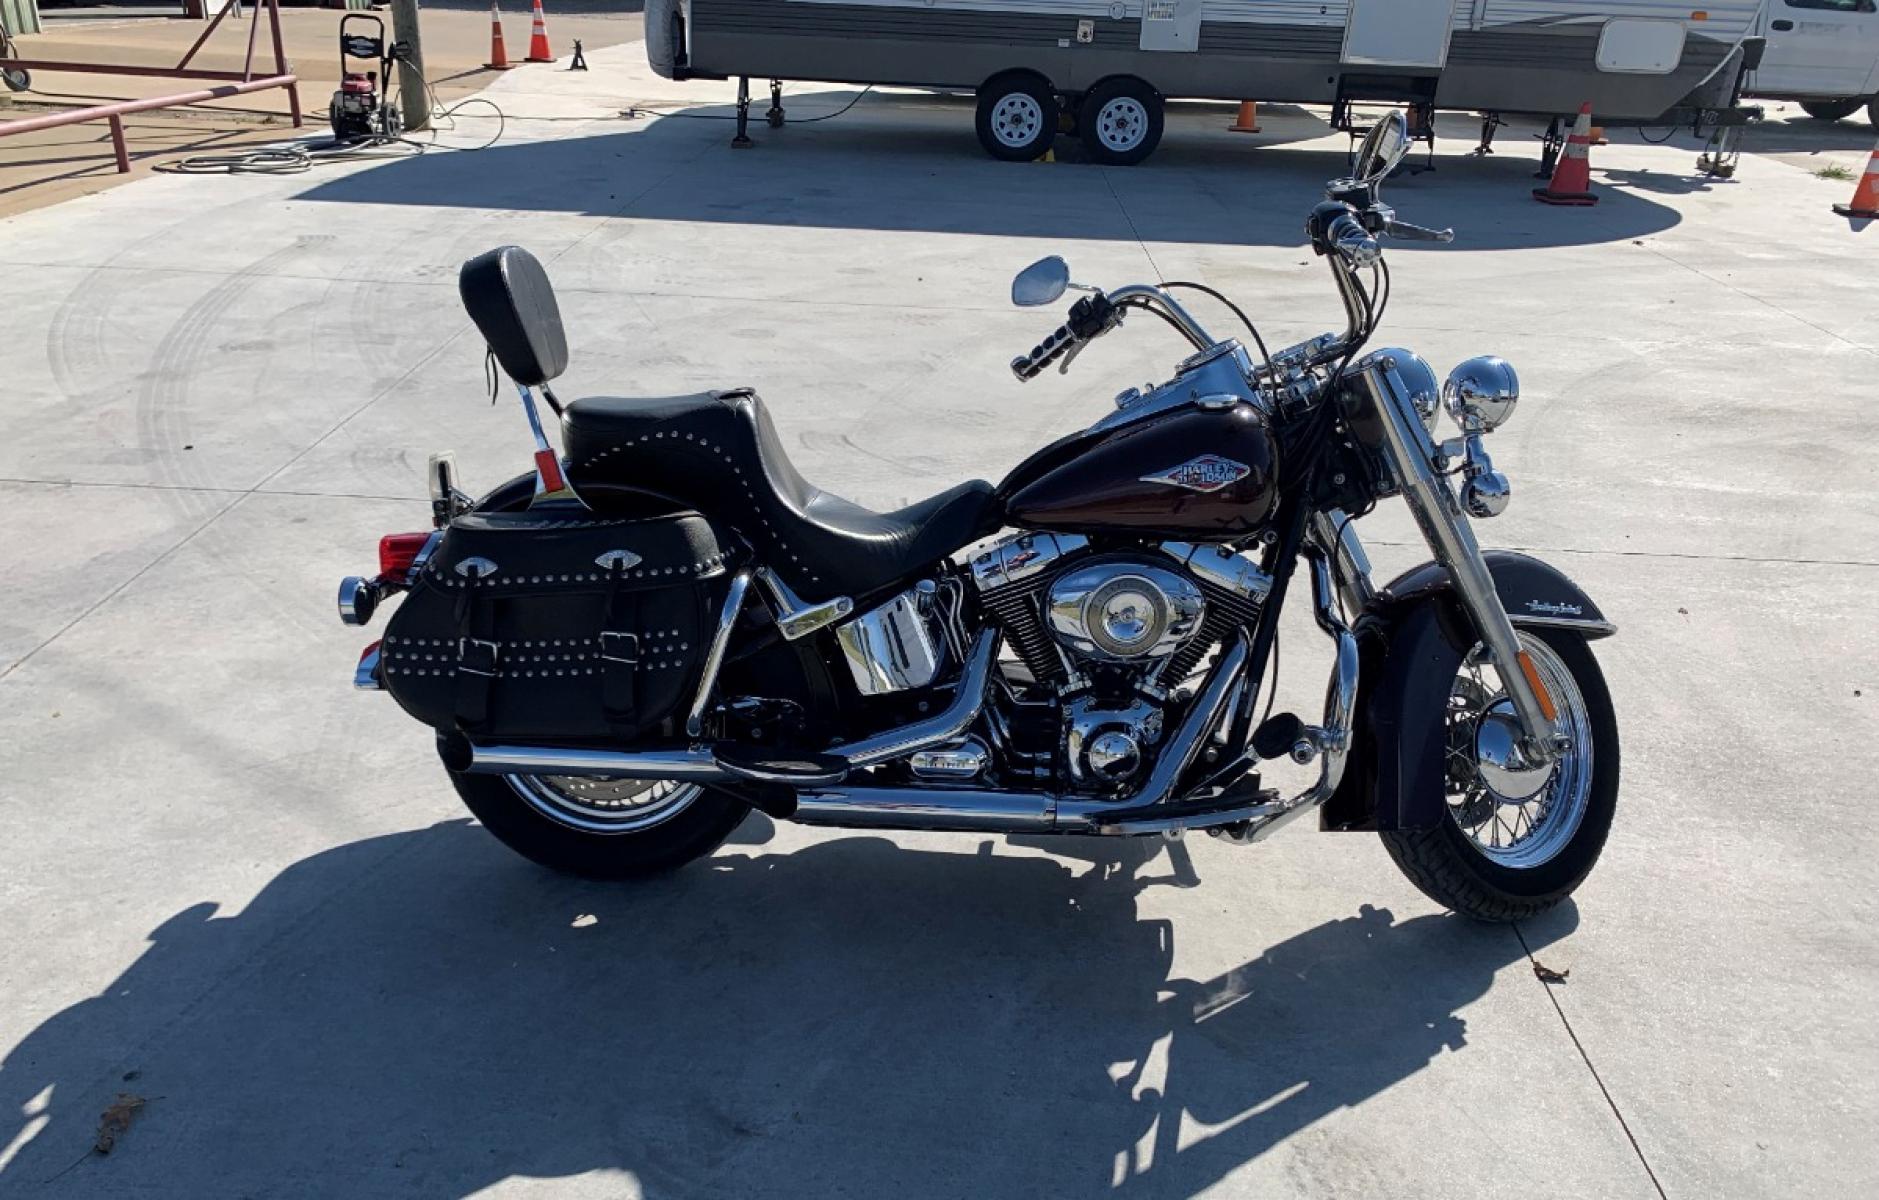 2009 PURPLE Harley-Davidson FLSTC - (1HD1BW5199Y) , located at 17760 HWY 62, MORRIS, 74445, 35.609104, -95.877060 - 2009 HARLEY- DAVIDSON FLSTC HERITAGE SOFTAIL 1584CC FEATURES CRUISE CONTROL, CHROME PASSING LAMPS, CHROME STAGGERED SHORTY EXHAUST WITH DUAL MUFFLERS, STUDDED LEATHER SADDLEBAGS, AND A FULL WINDSHIELD. A SMOOTH RIDE FOR LONG-RANGE TOURING COMFORT. IT RUNS GREAT !! ONLY 14,596 MILES. ** REBUILT TITLE - Photo #5